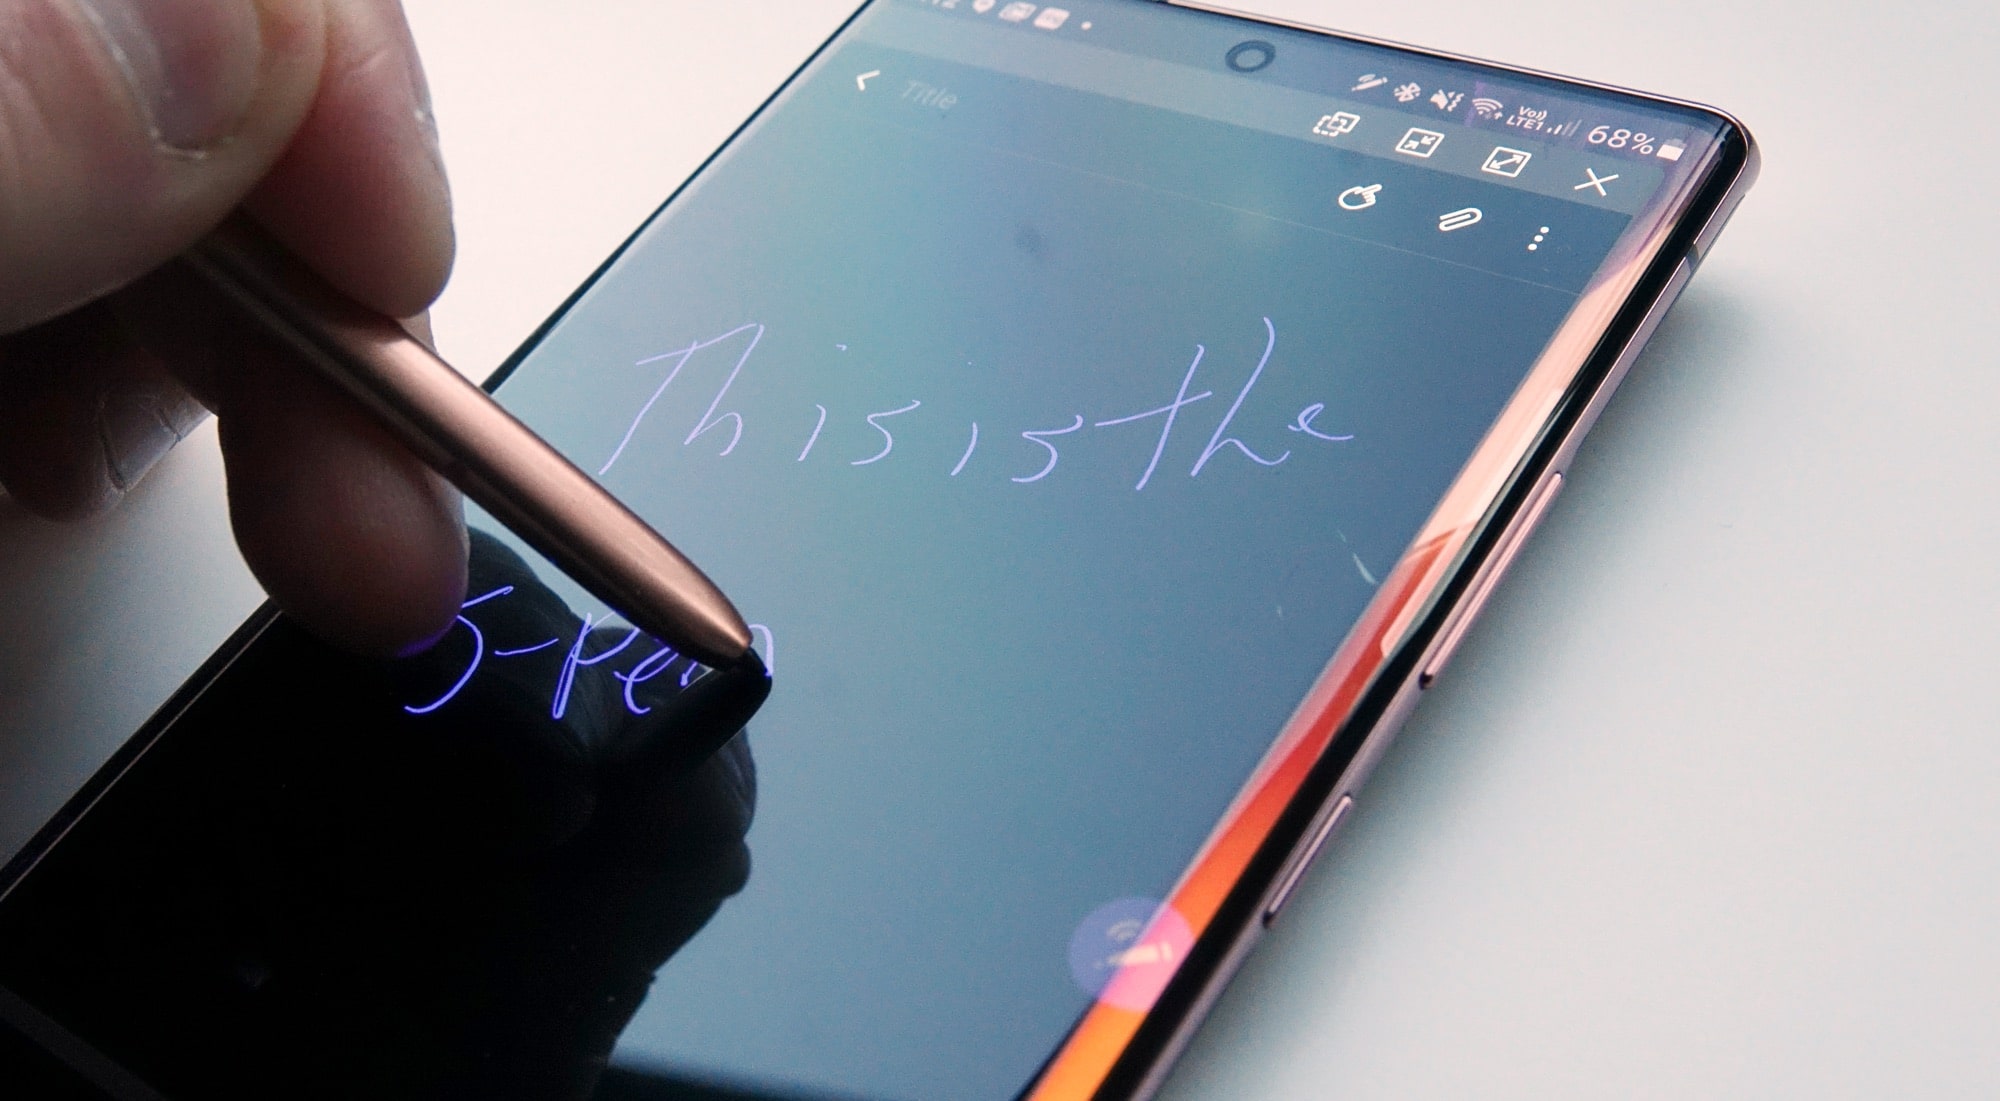 Writing on the Samsung Galaxy Note 20 Ultra